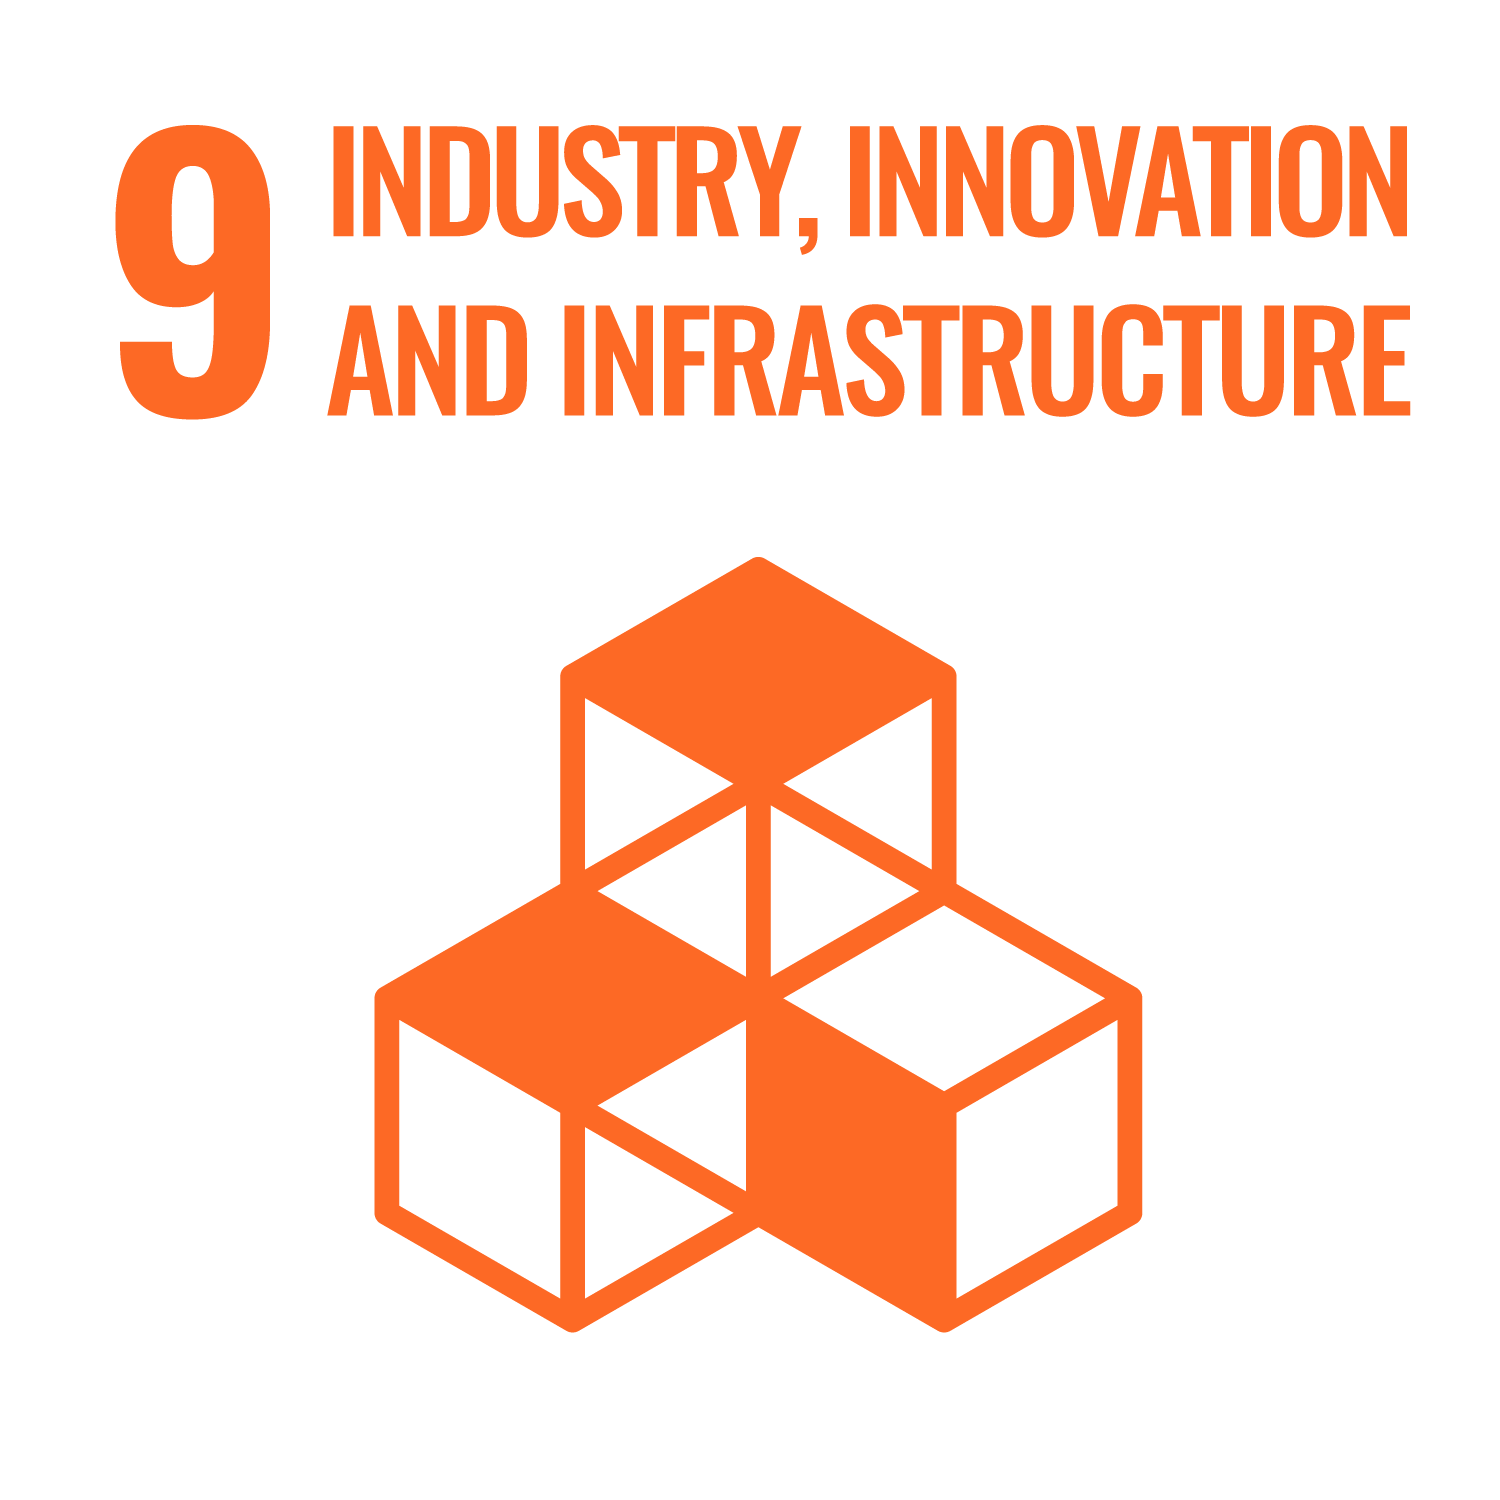 Goal 9: Build resilient infrastructure, promote inclusive and sustainable industrialization, and foster innovation